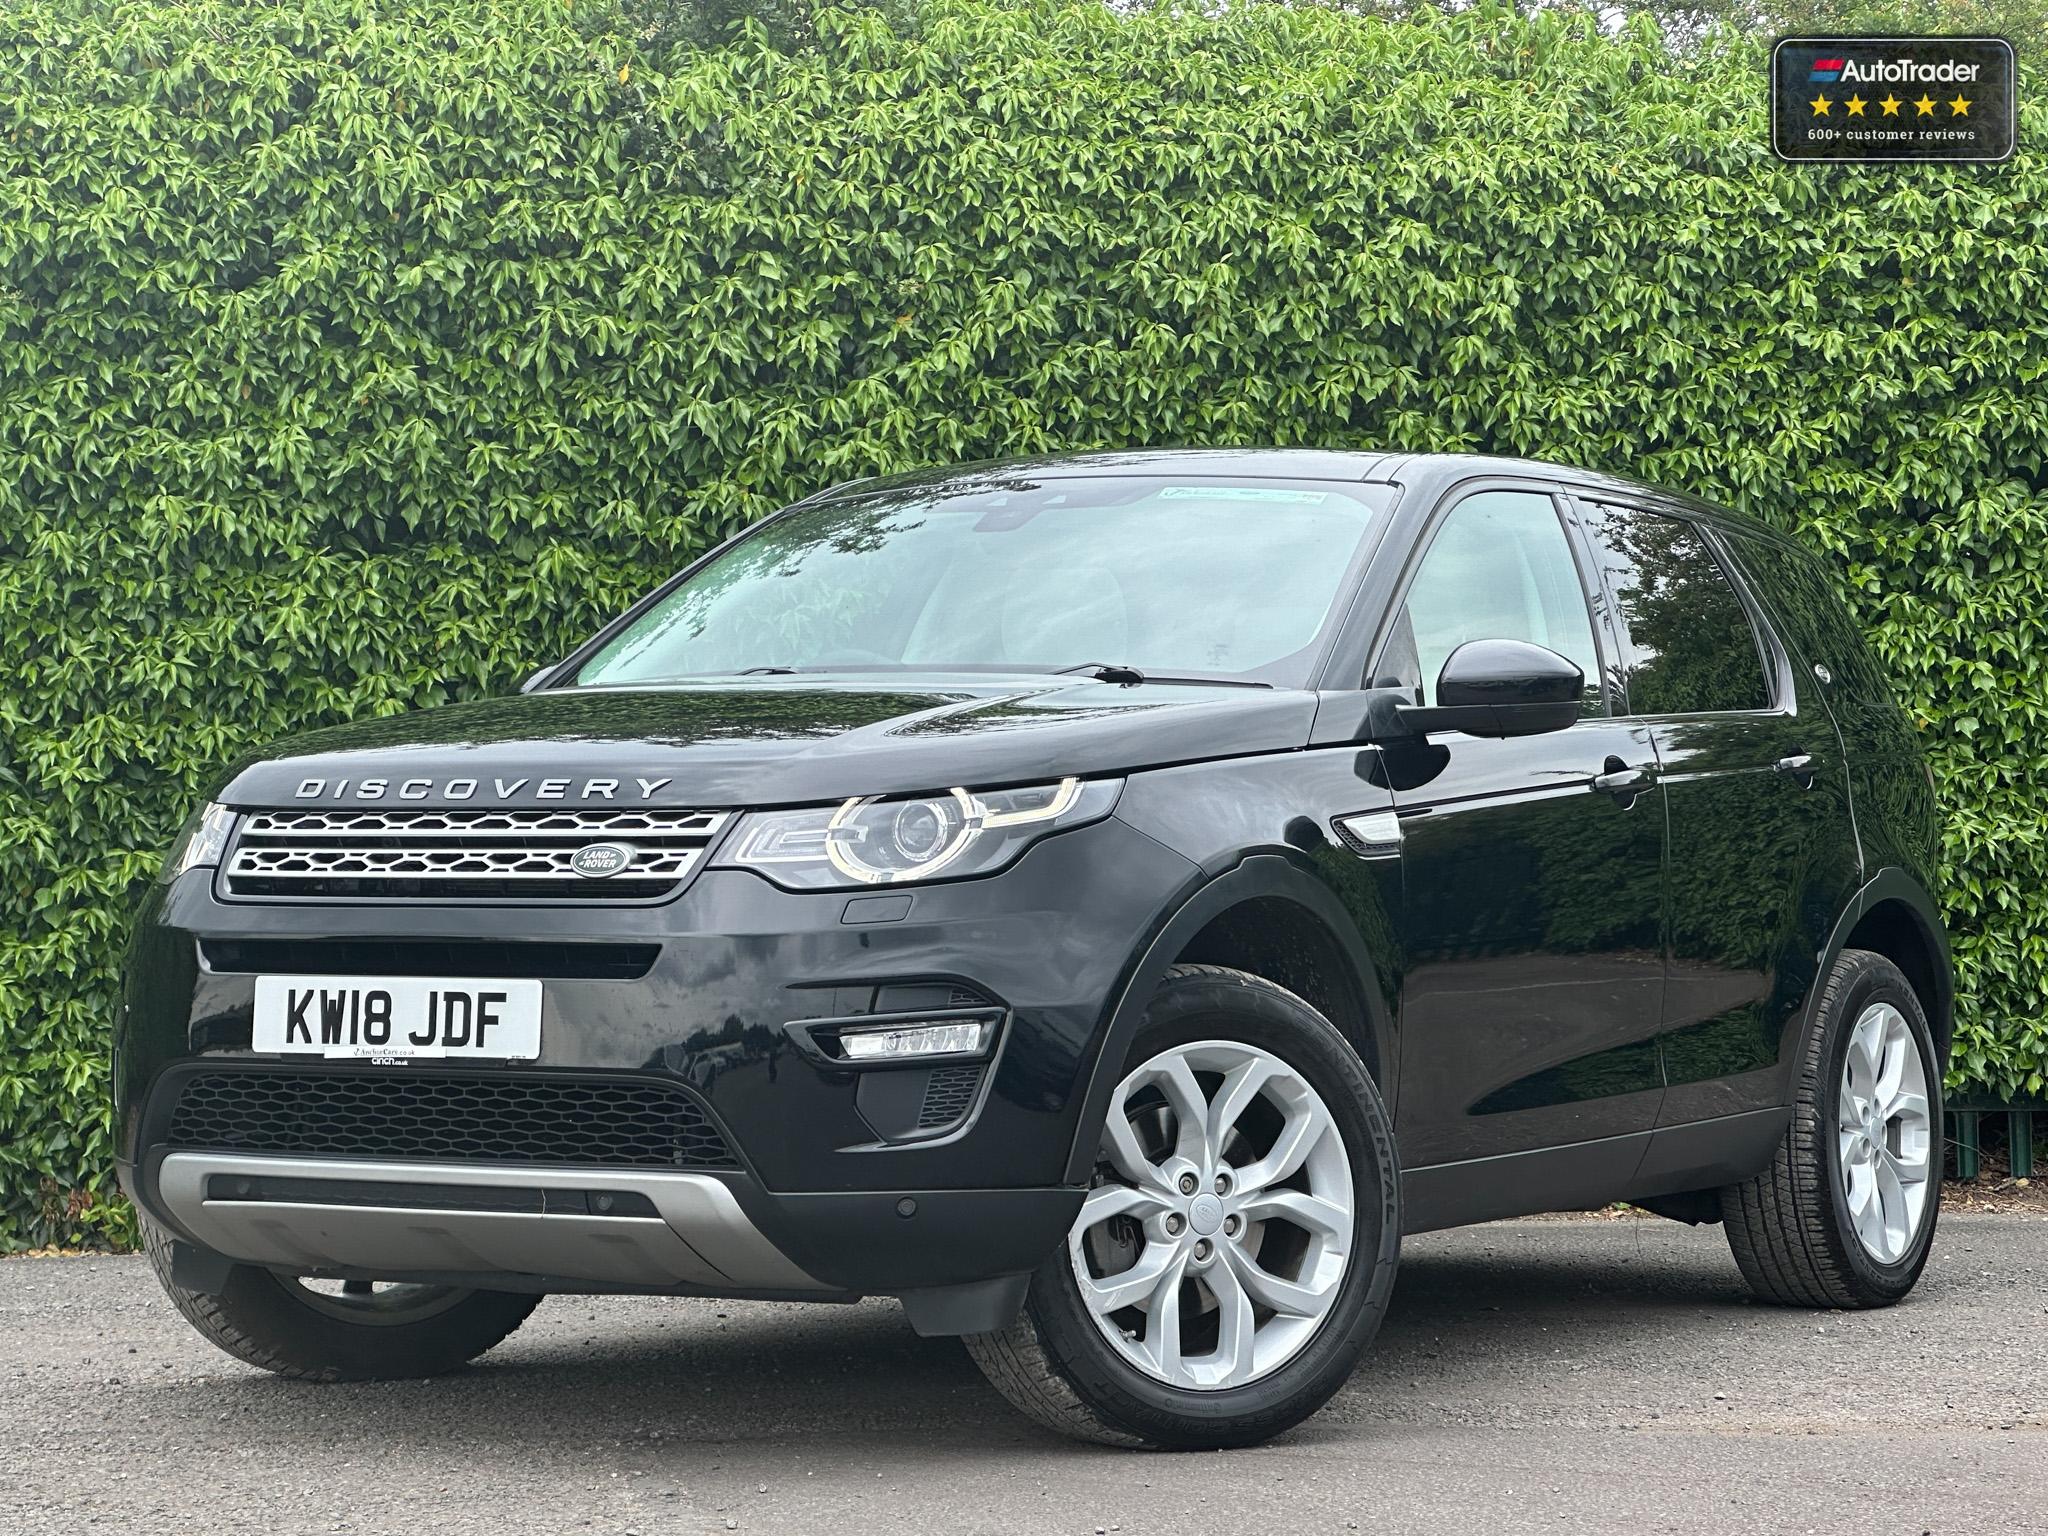 Land Rover Discovery Sport KW18 JDF